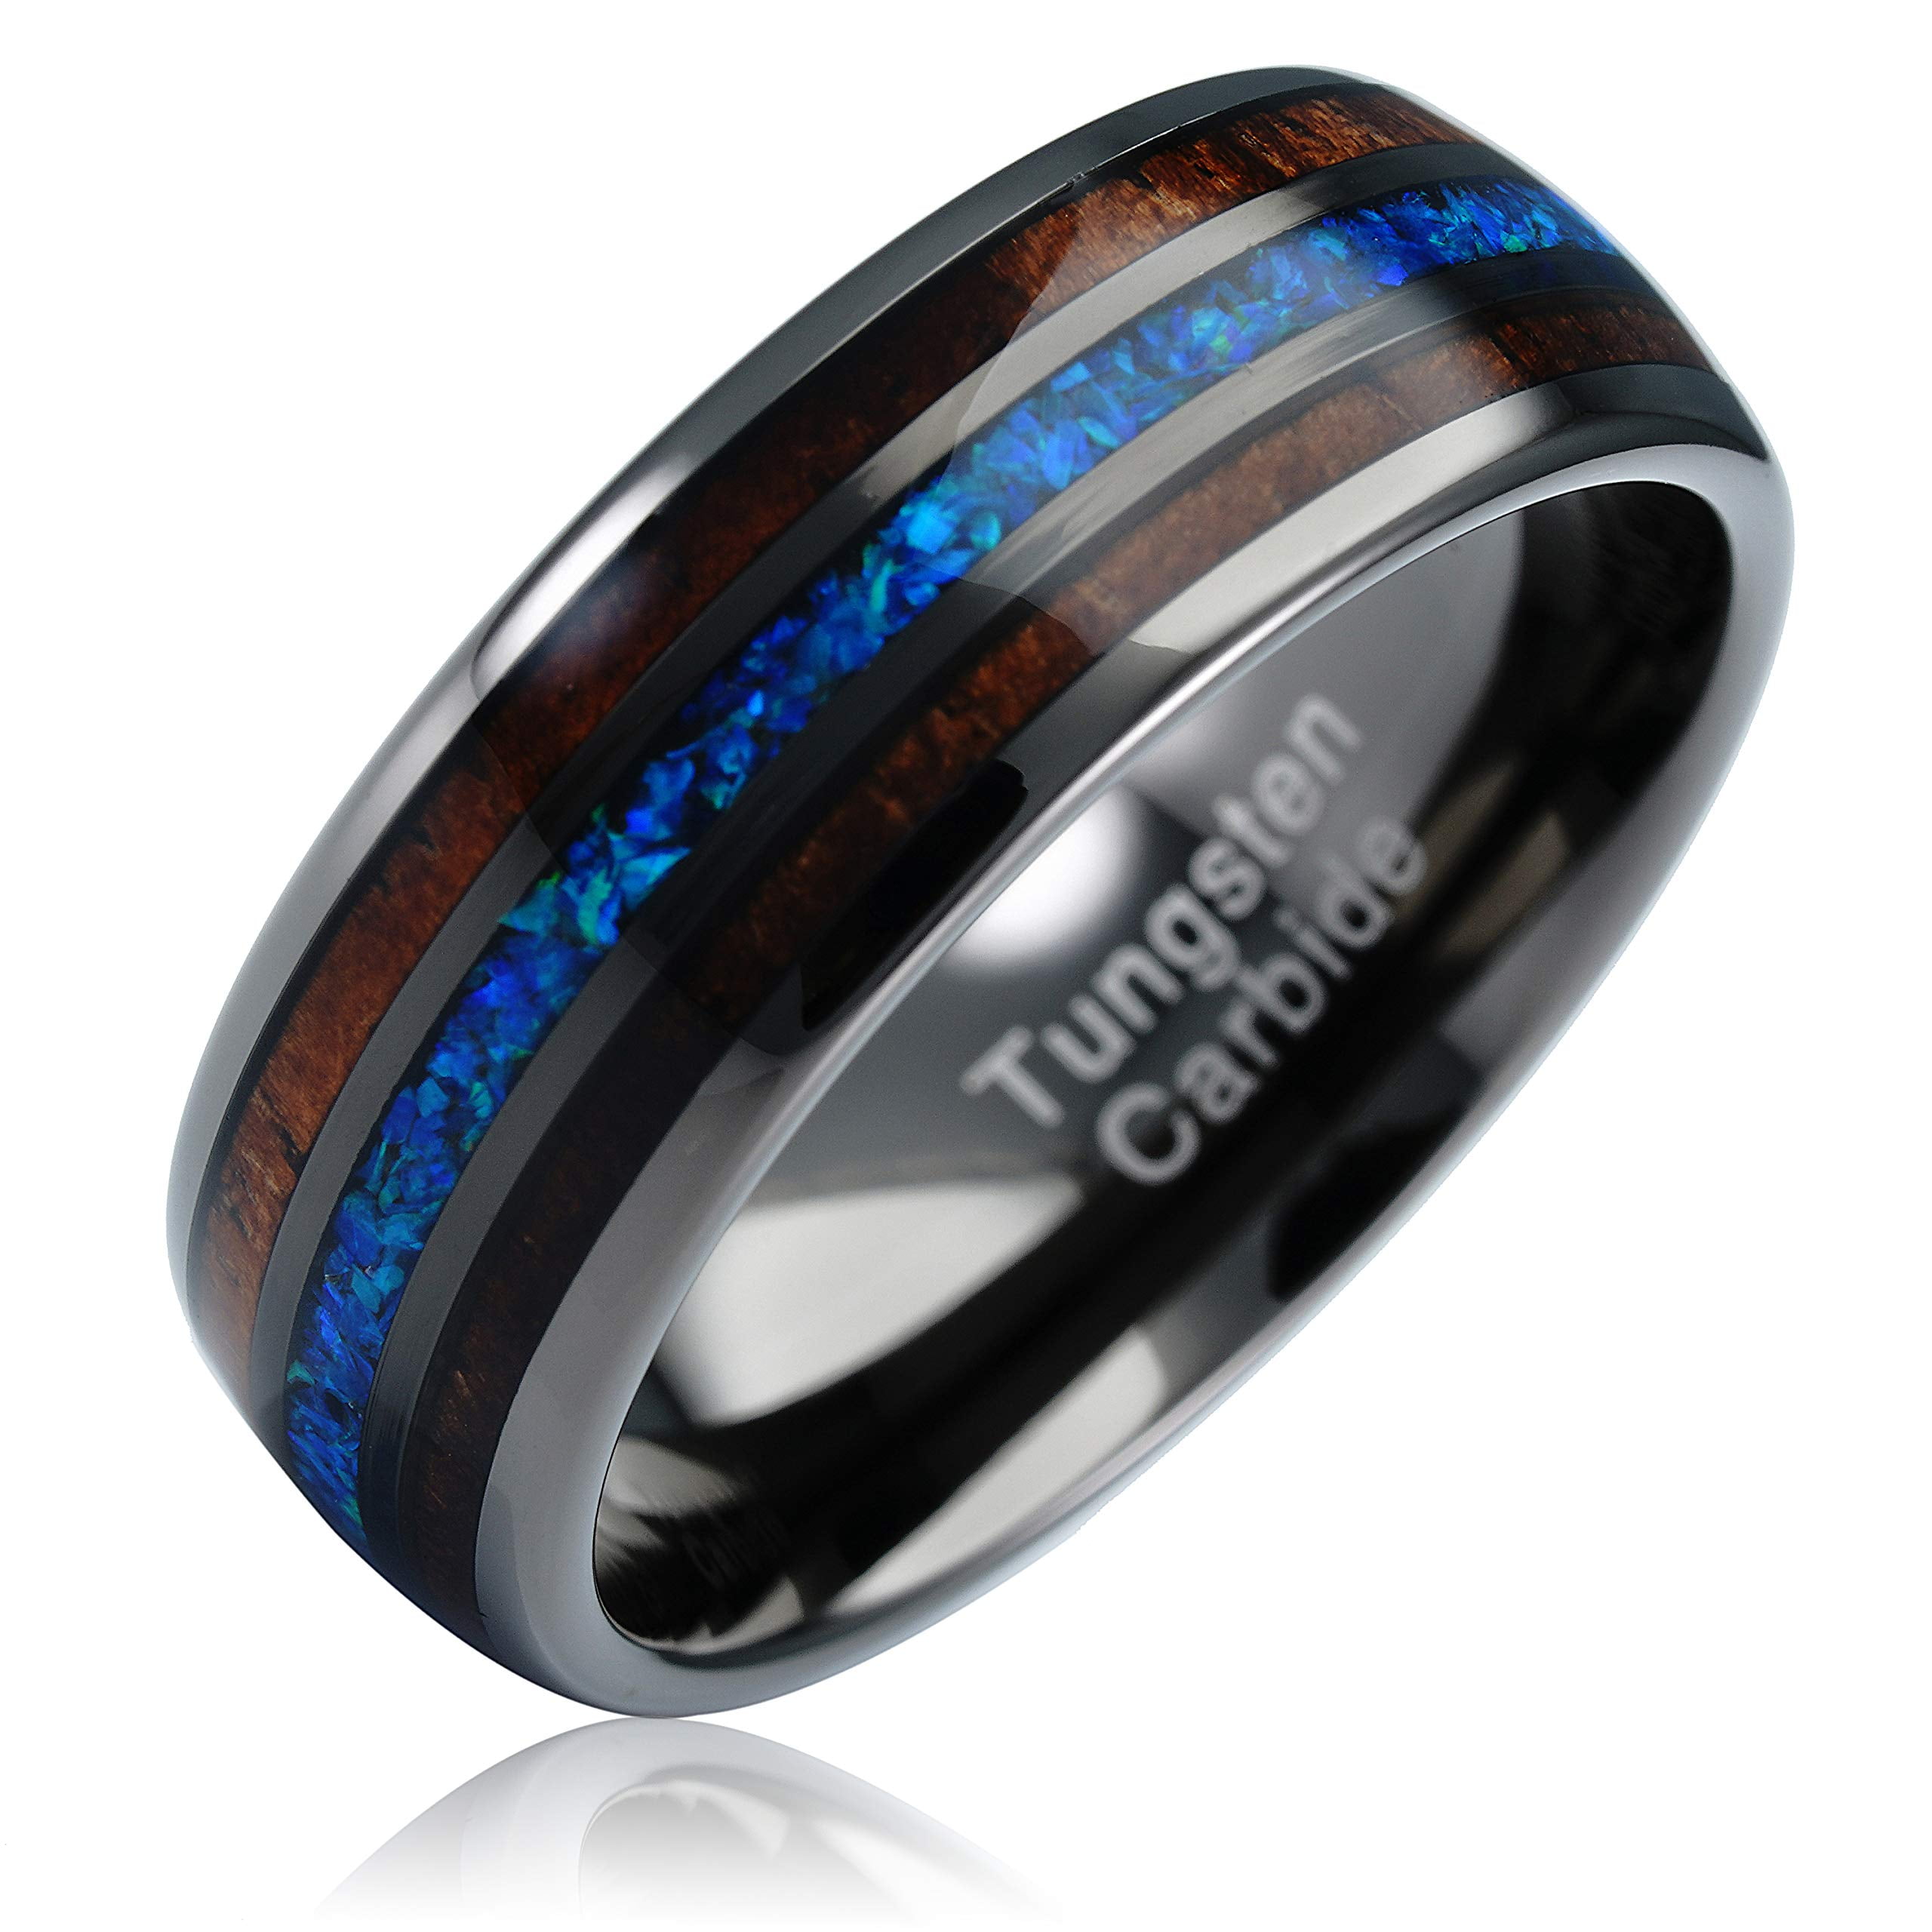 Black Tungsten Hunting Wedding Ring Wood Inlay Deer Stag Silhouette Xmas Jewelry